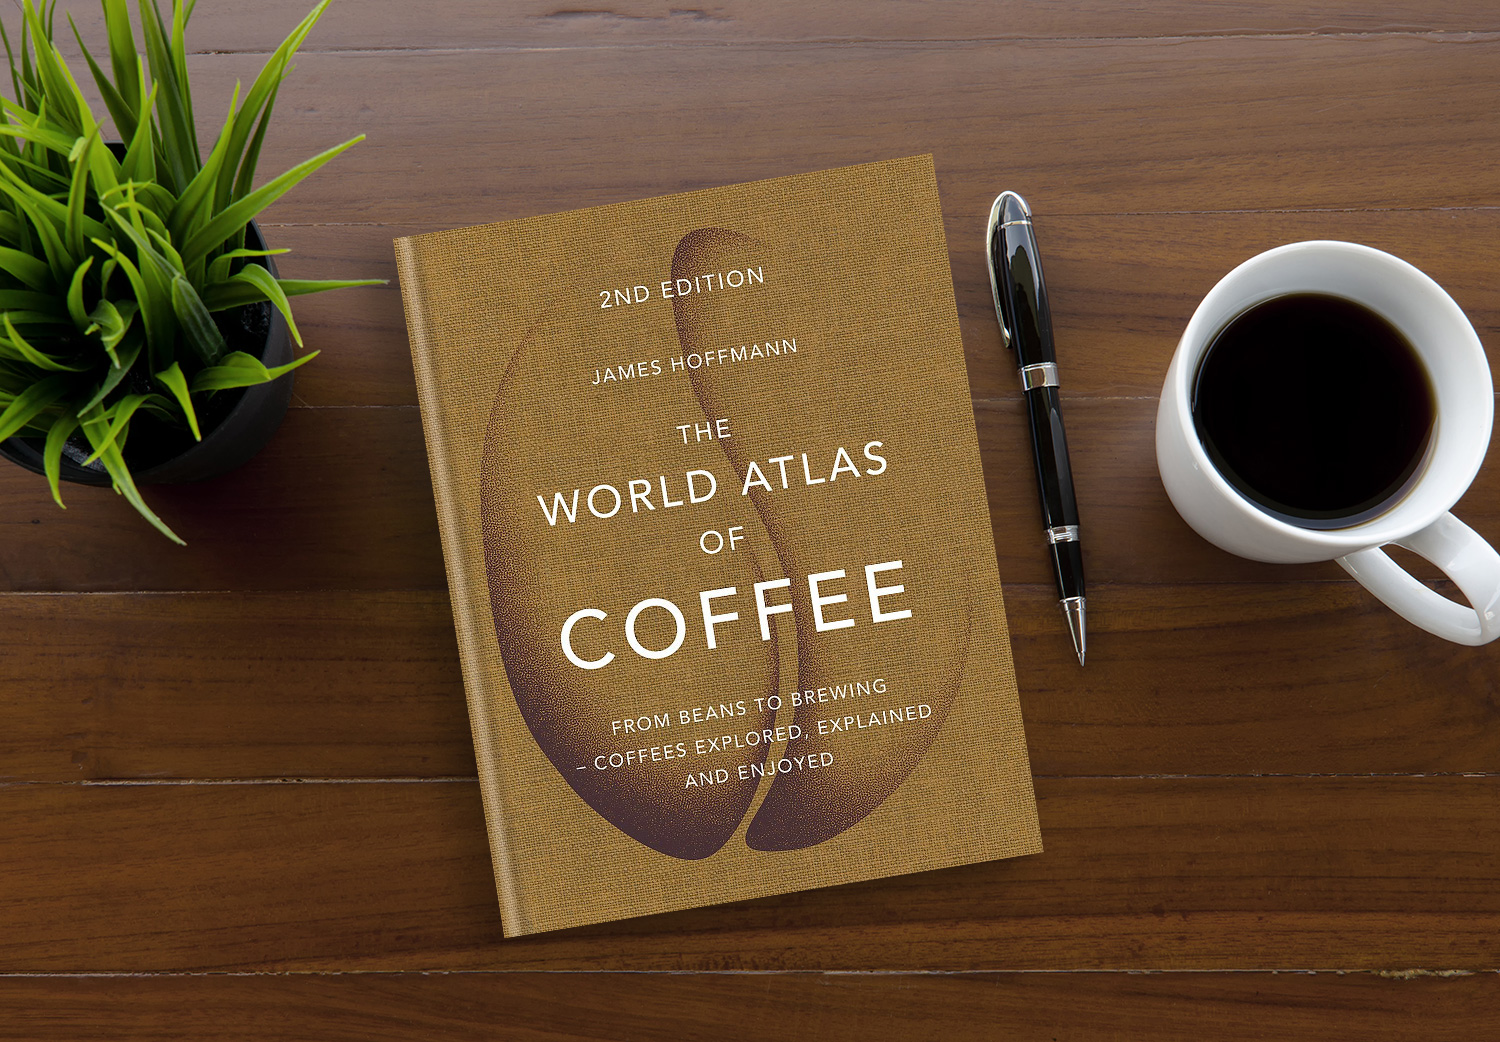 The World Atlas of Coffee by James Hoffman on a wooden table.